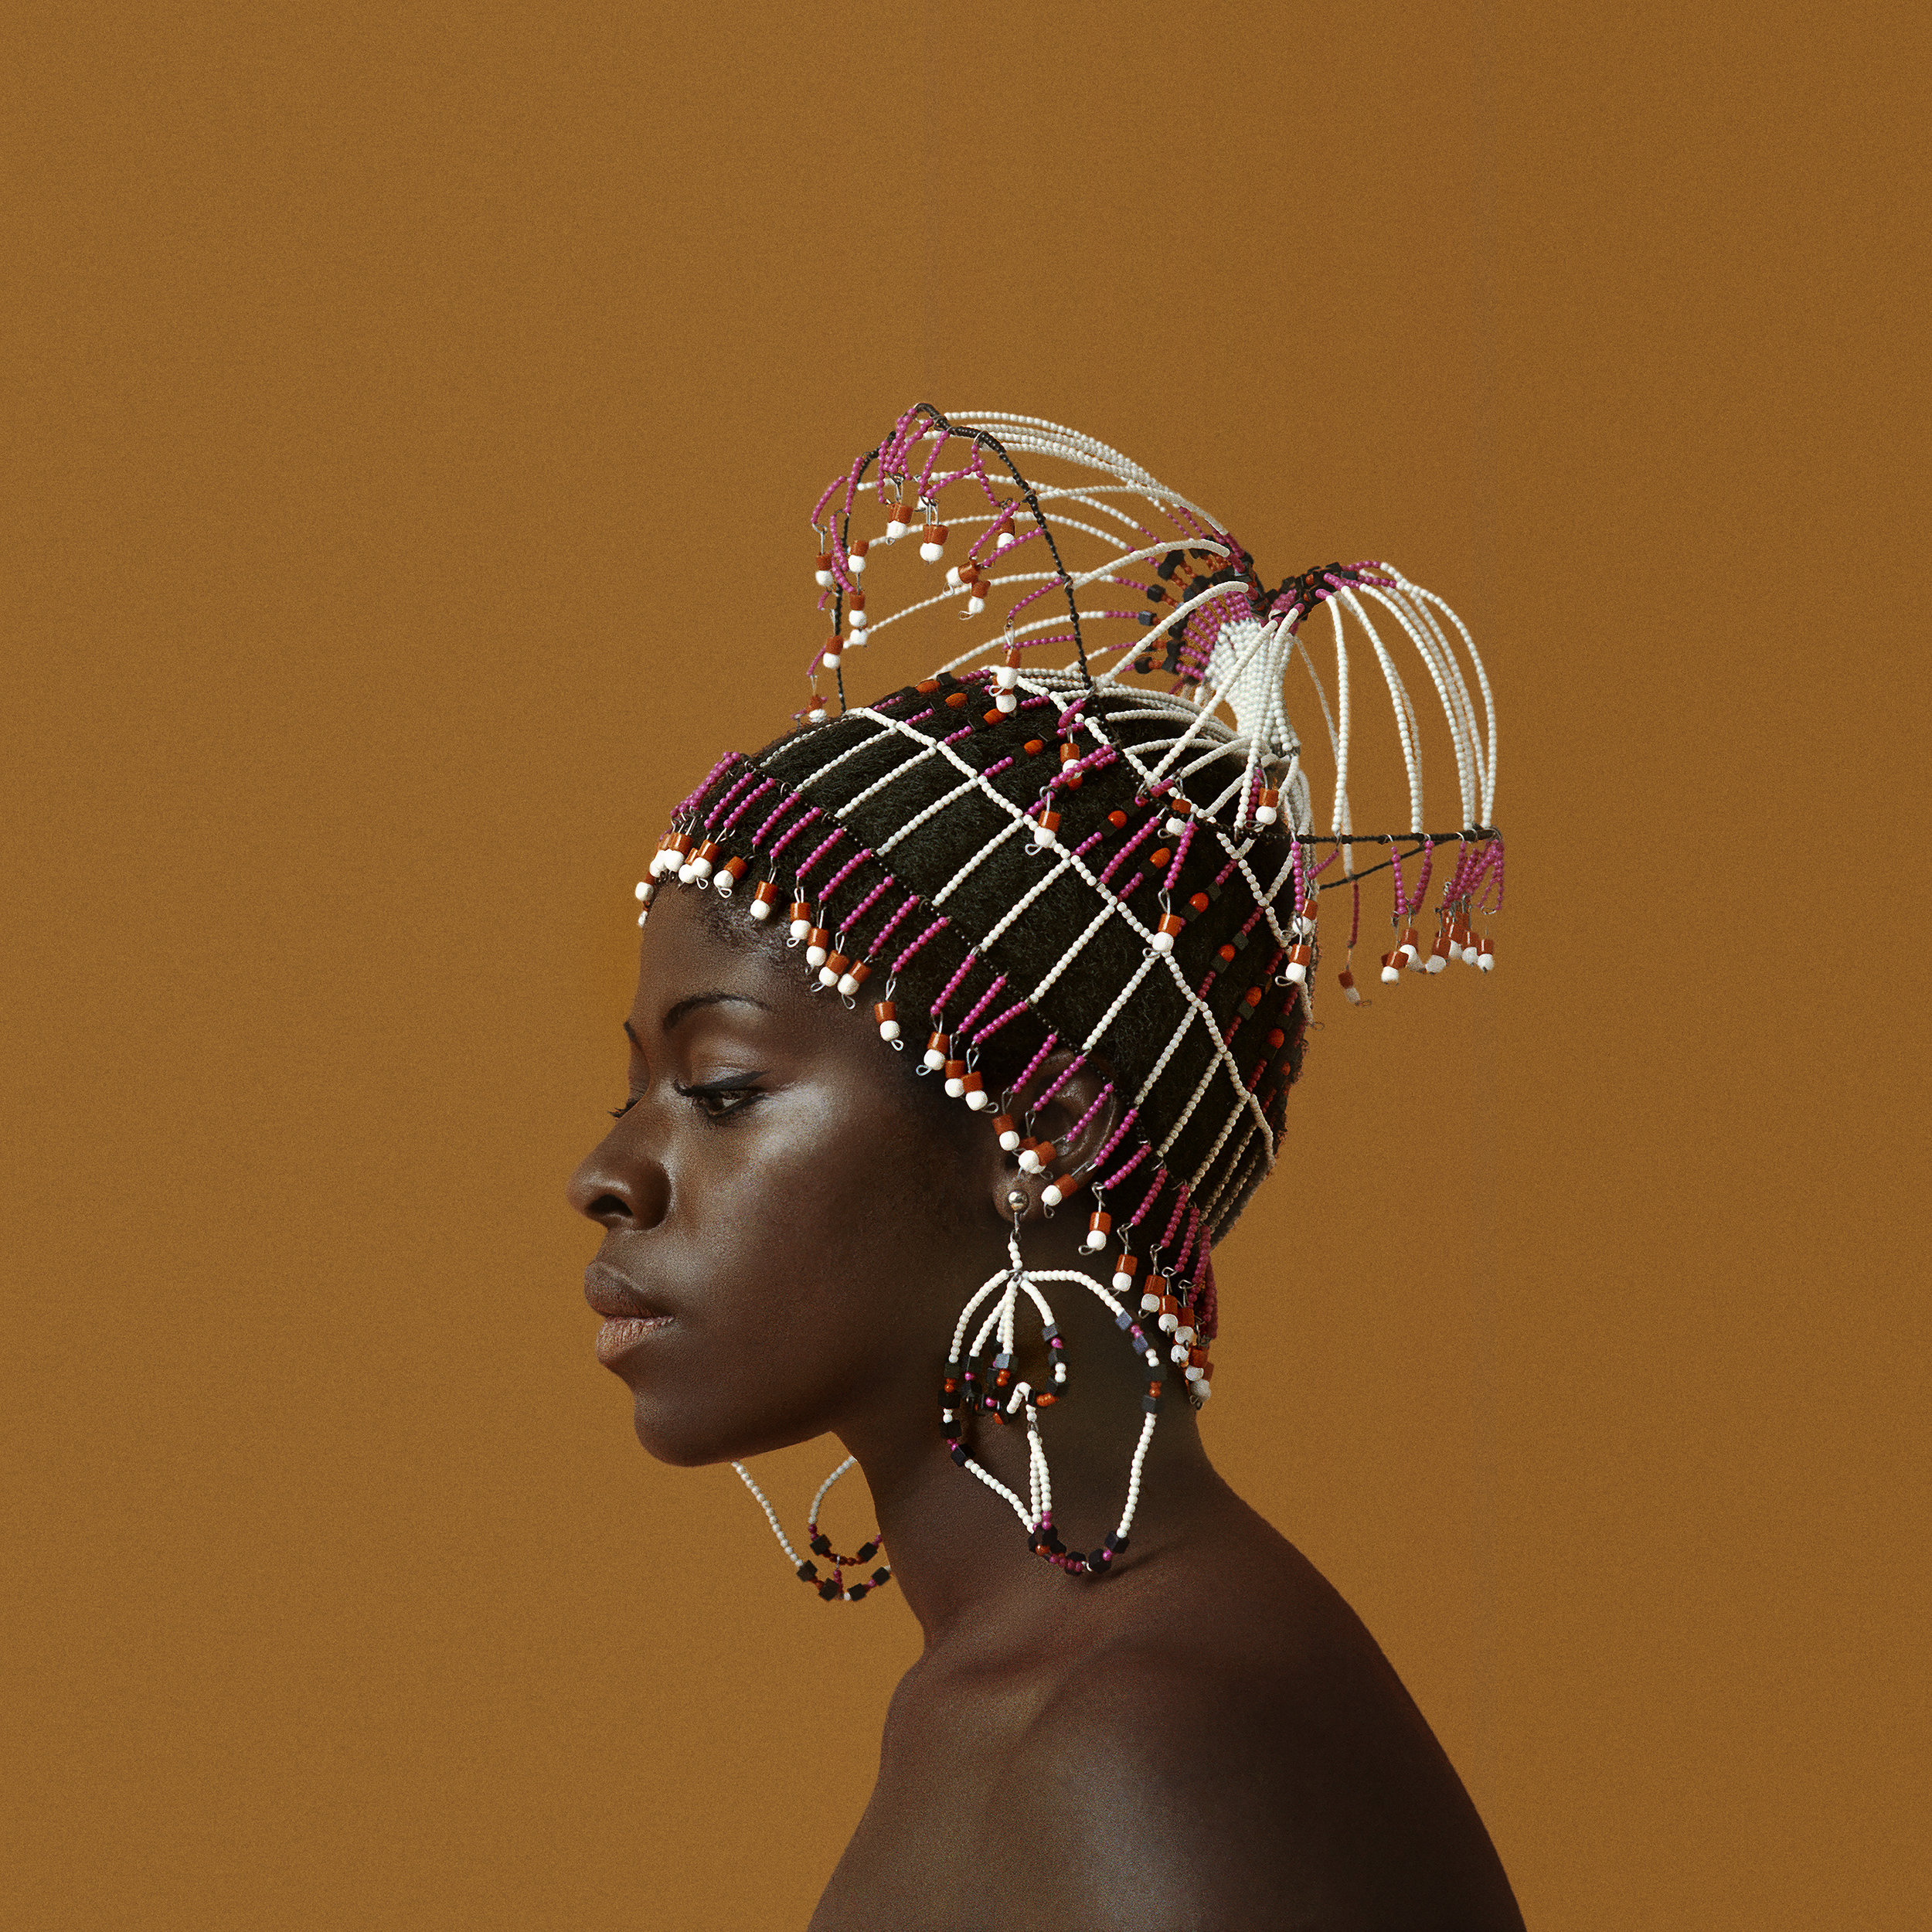  Kwame Brathwaite. Sikolo Brathwaite wearing a headpiece designed by Carolee Prince, AJASS, Harlem, 1968. Courtesy of the artist and Philip Martin Gallery, Los Angeles. 